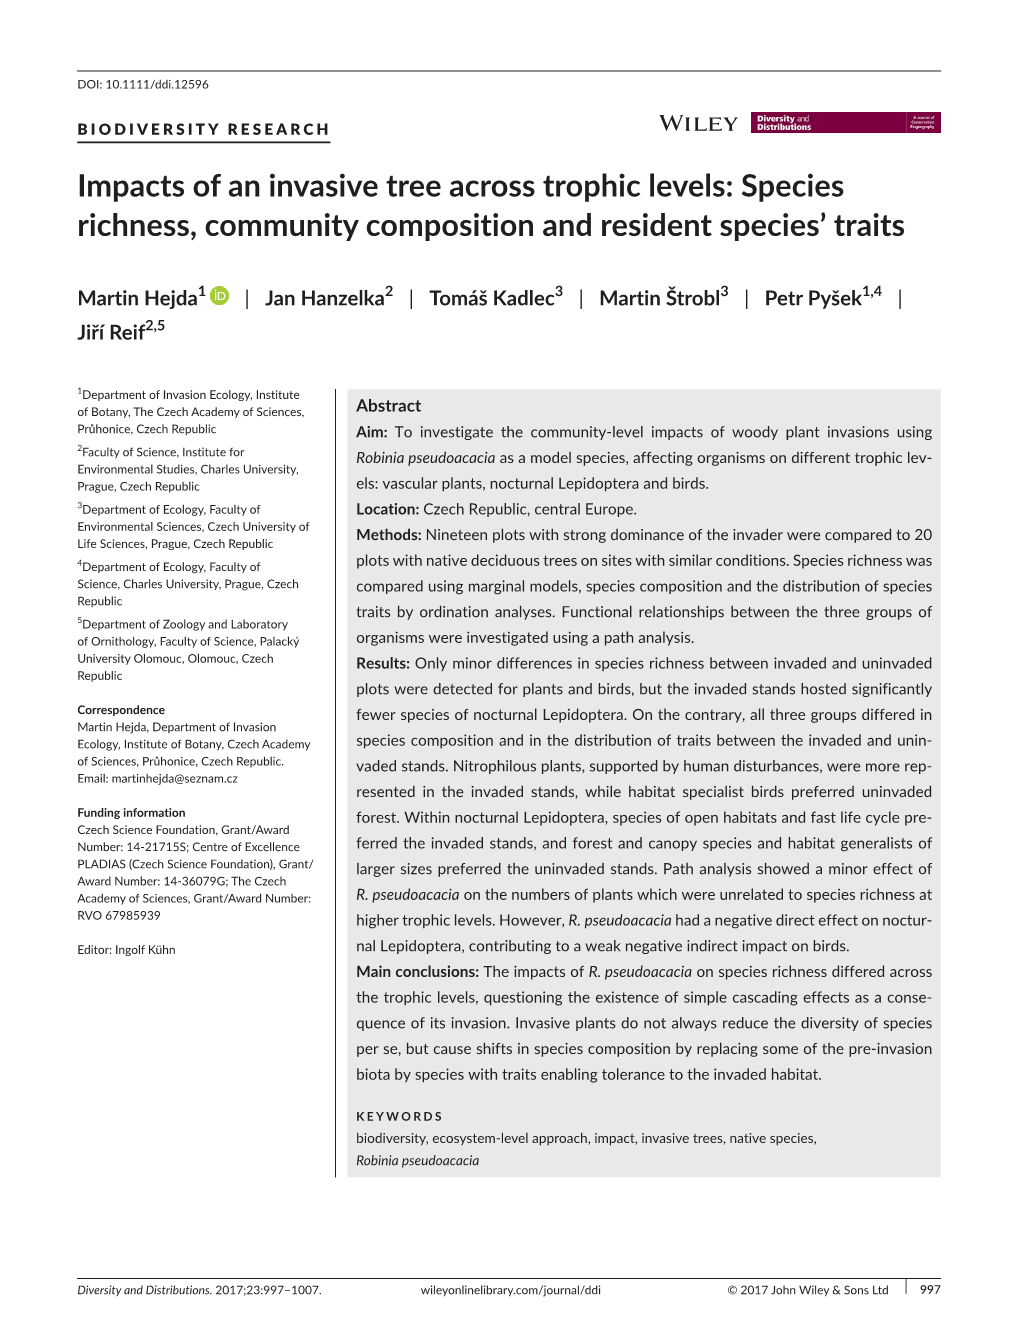 Impacts of an Invasive Tree Across Trophic Levels: Species Richness, Community Composition and Resident Species' Traits